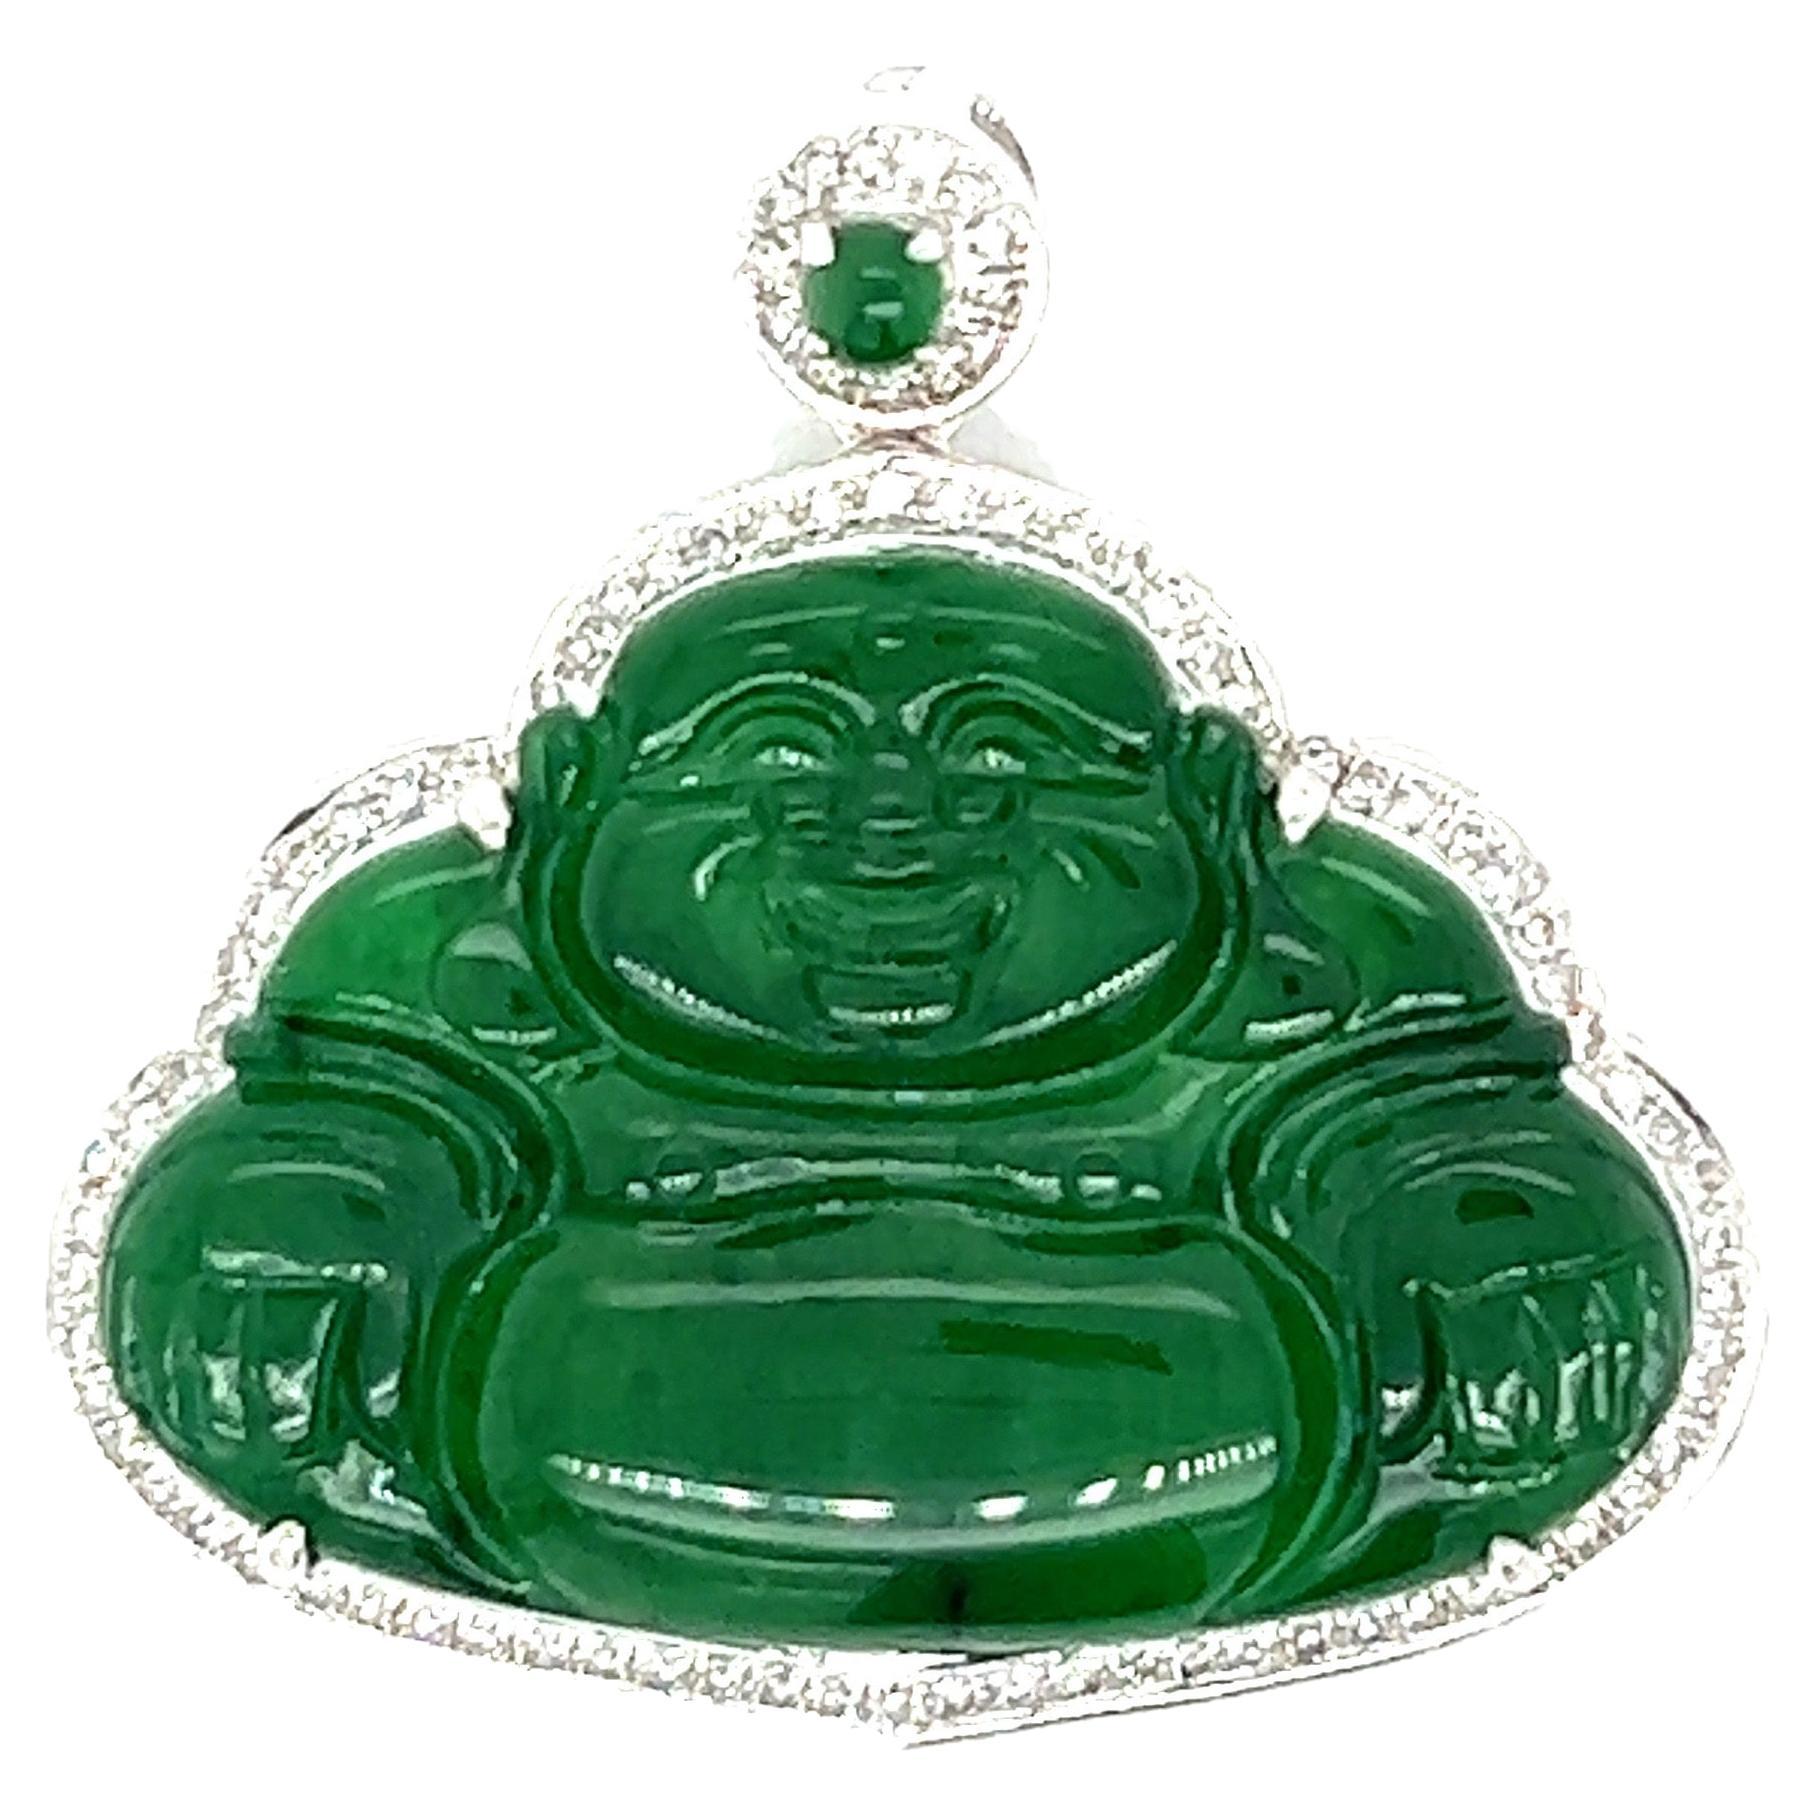 What is the difference between jade and jadeite?